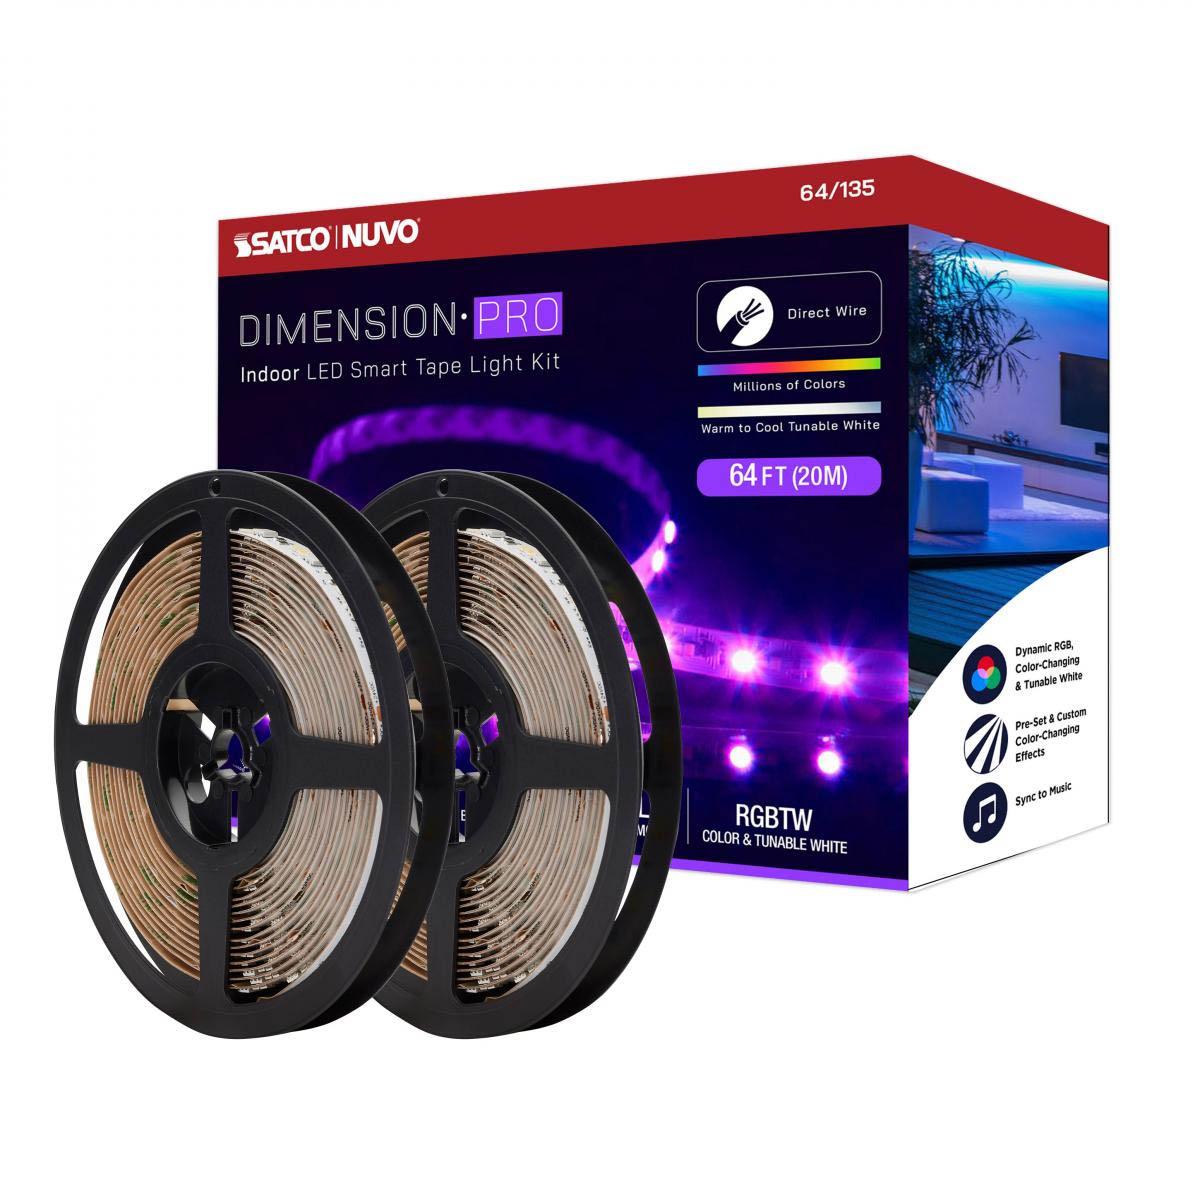 Dimension Pro LED Smart Tape Light Kit with Remote, 65ft Reel, Color Changing RGB and Tunable White, 24V, J-Box Connection - Bees Lighting